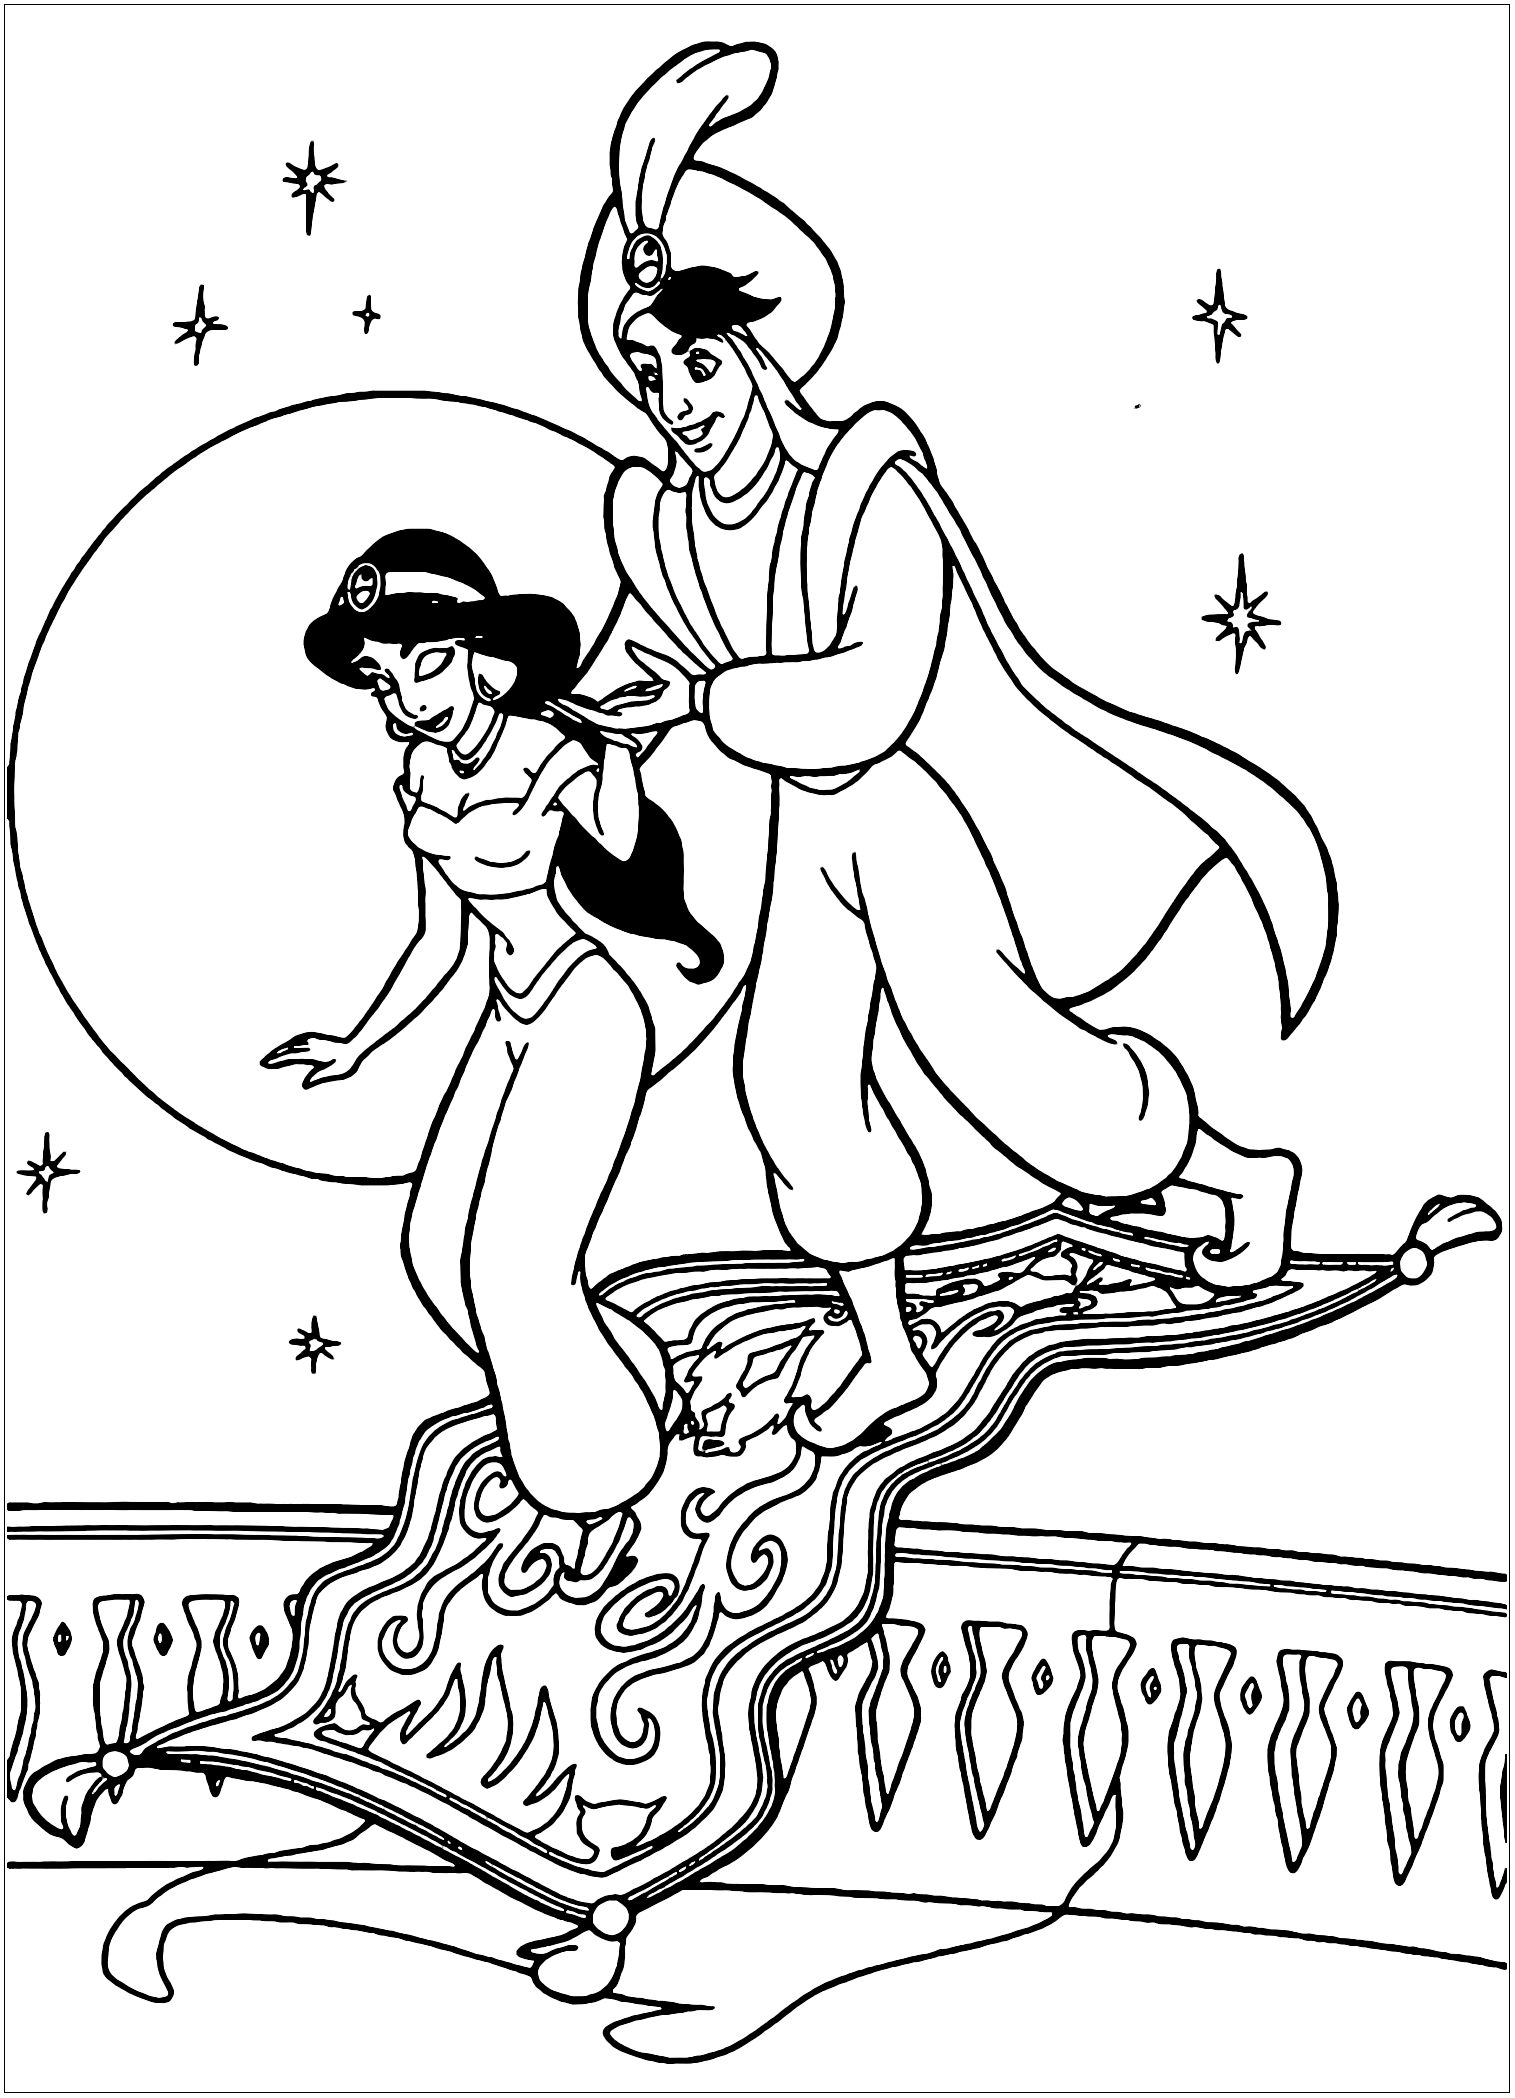 Aladdin and Jasmine returning from their trip on a flying carpet